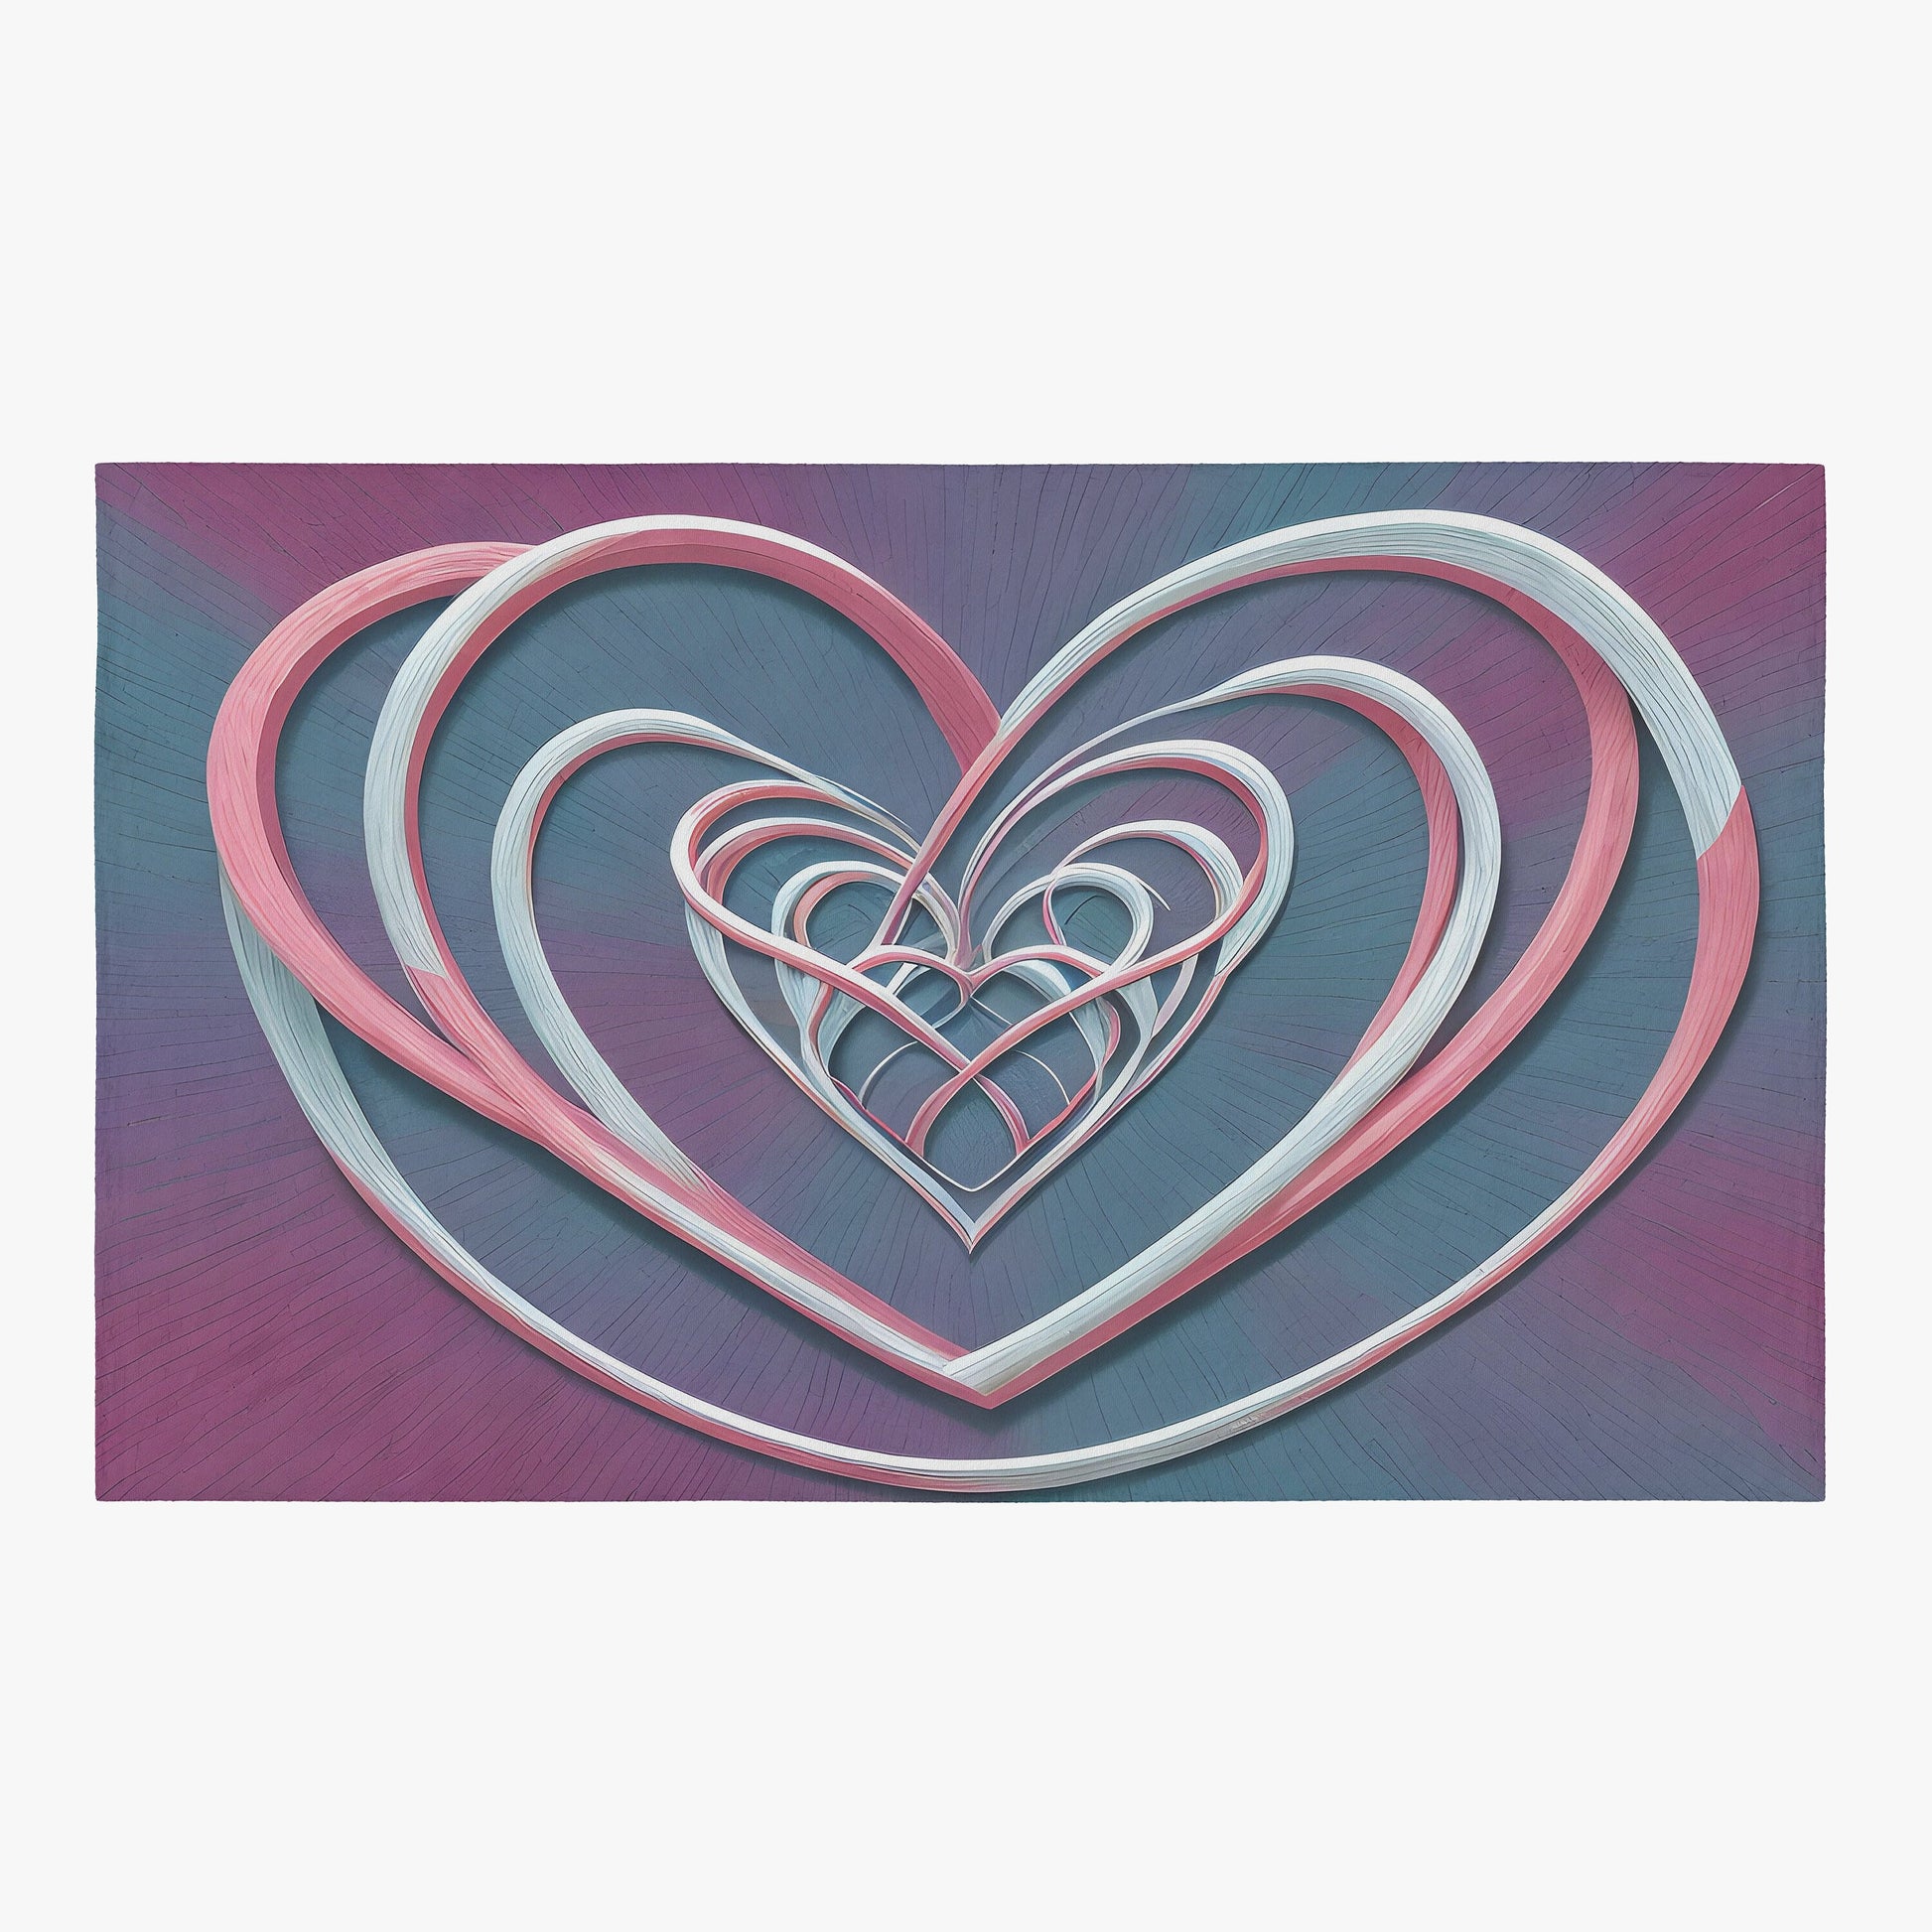 Heart Rug Pink blue hearts Rug Intertwined hearts Floor Rugs 3'x5' 4'x6' 5'x7' 8' x 10' Large rugs love